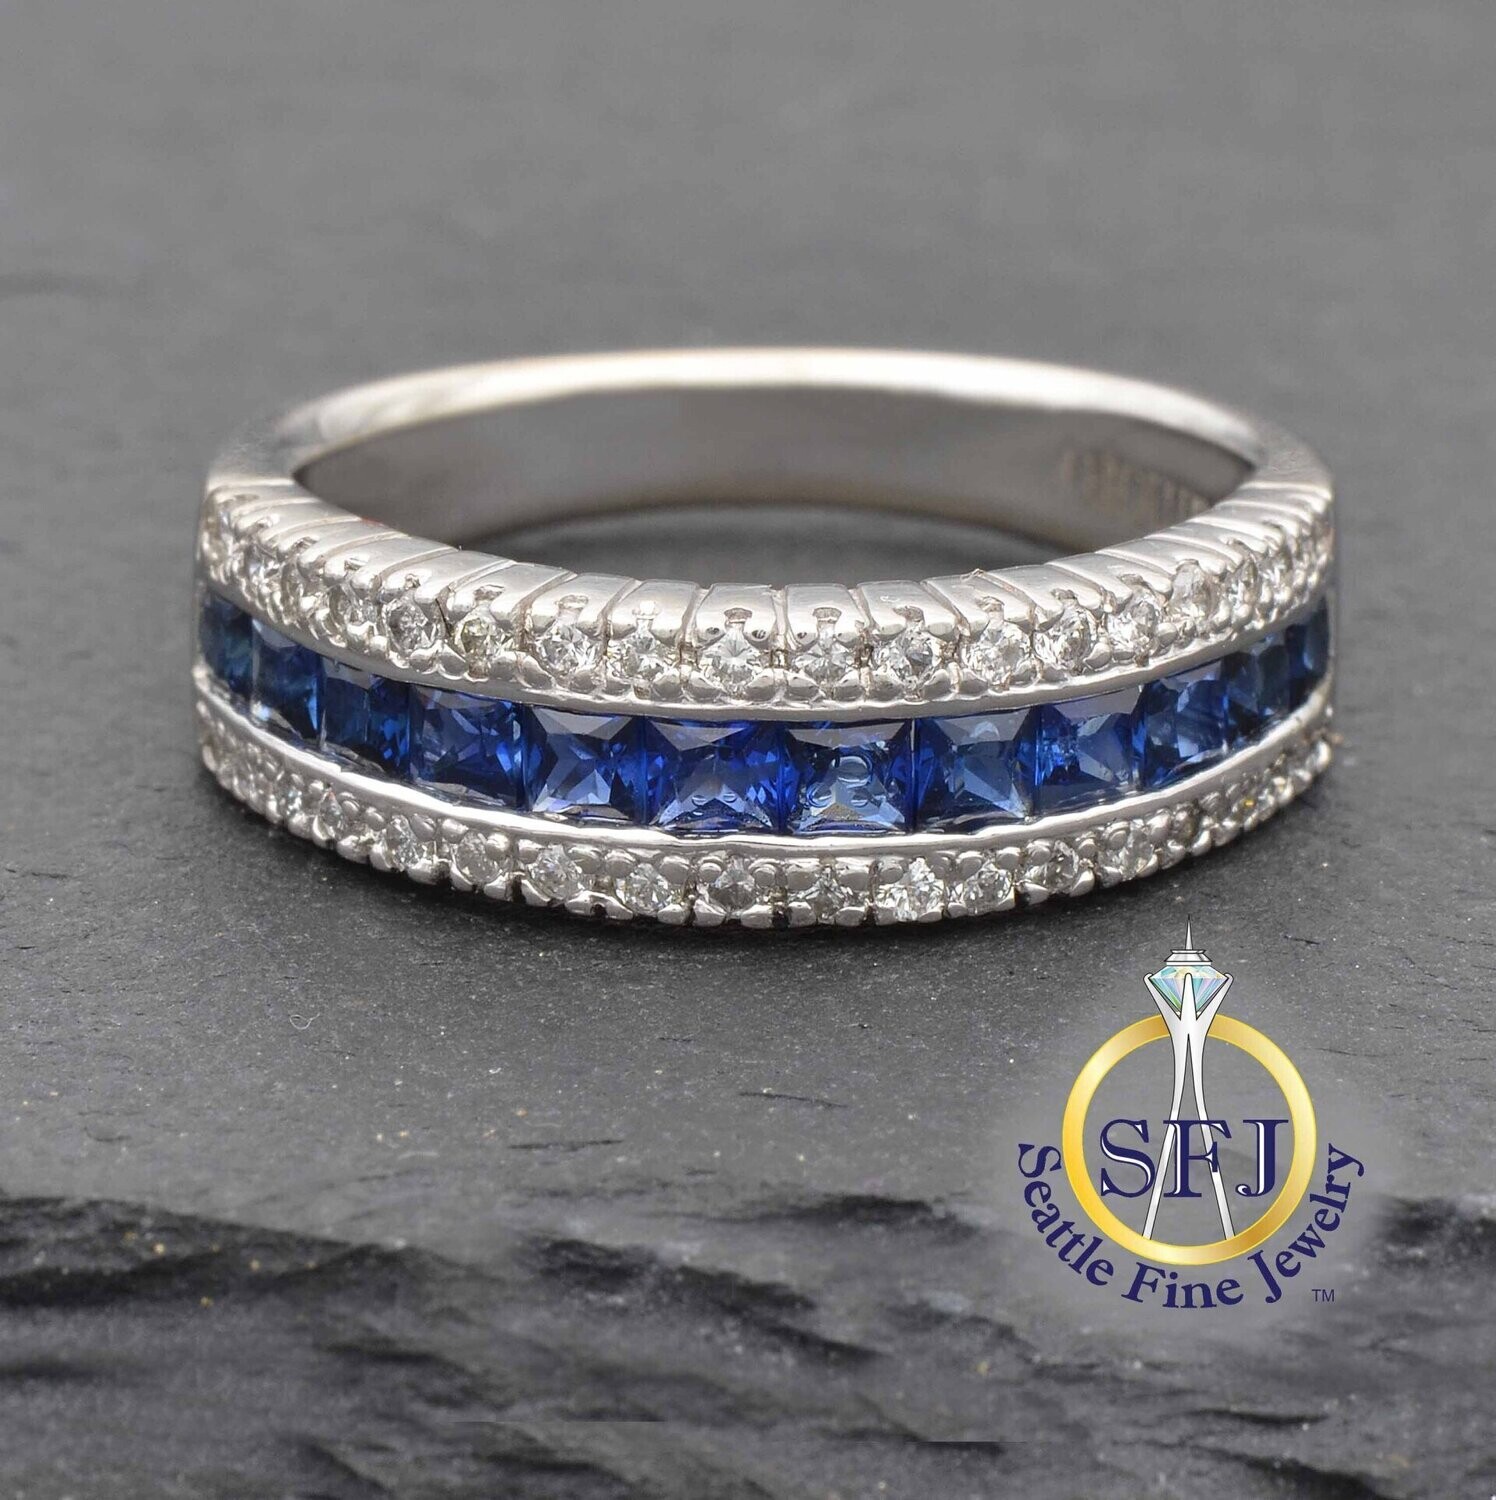 Sapphire and Diamond Band Ring, Solid 14K White Gold